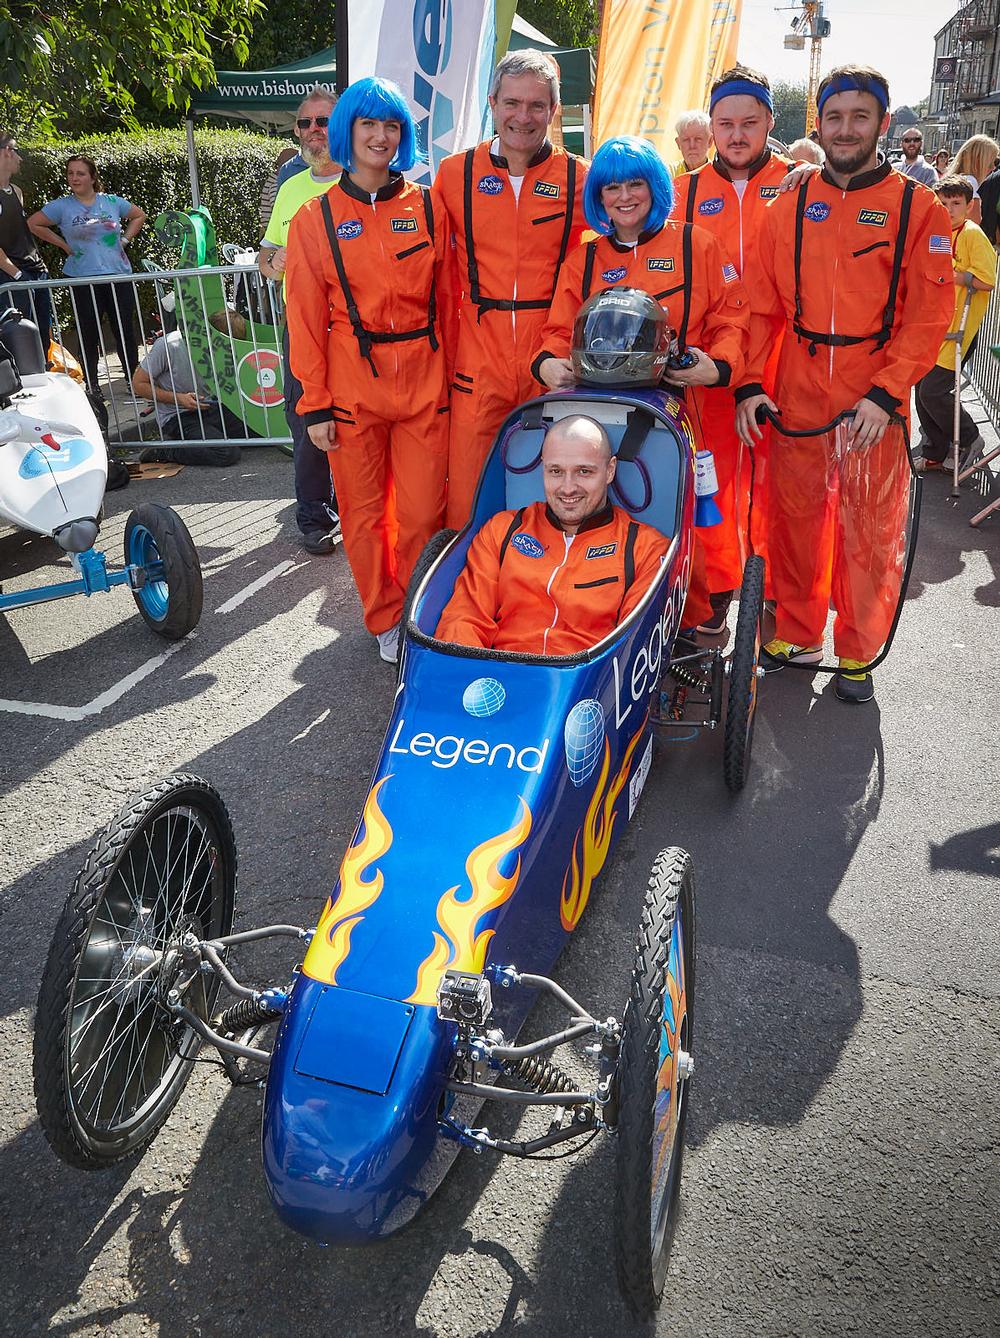 Legend competes in the Annual Micklegate Run Soapbox Race, raising funds for Cancer Research UK